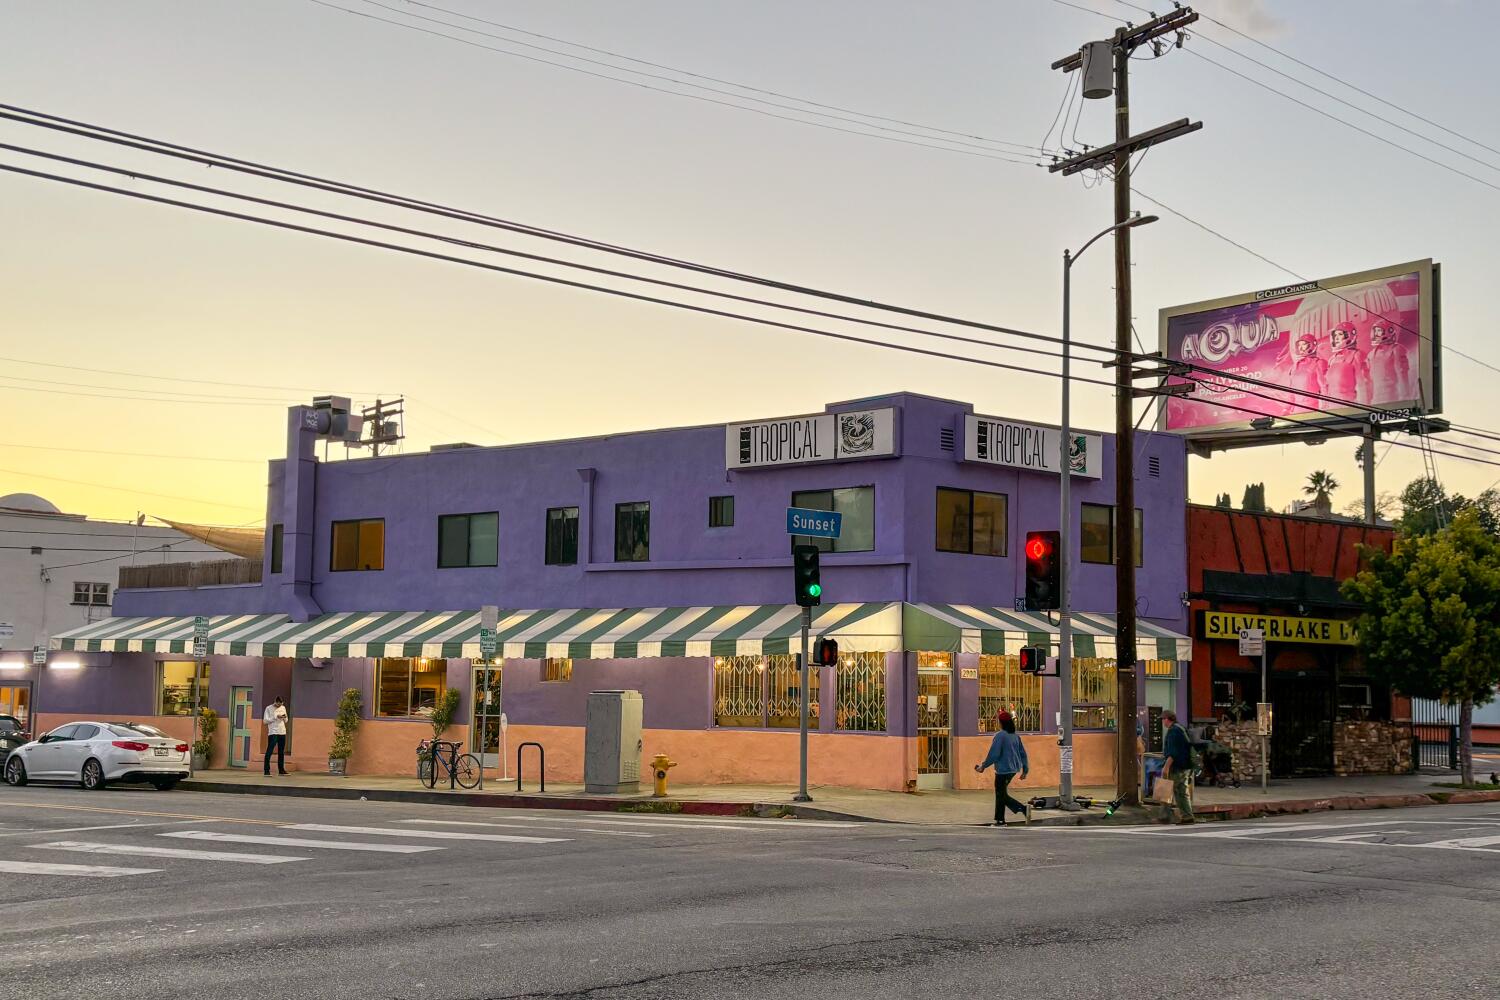 Shuttered Café Tropical was also a beacon for people seeking sobriety